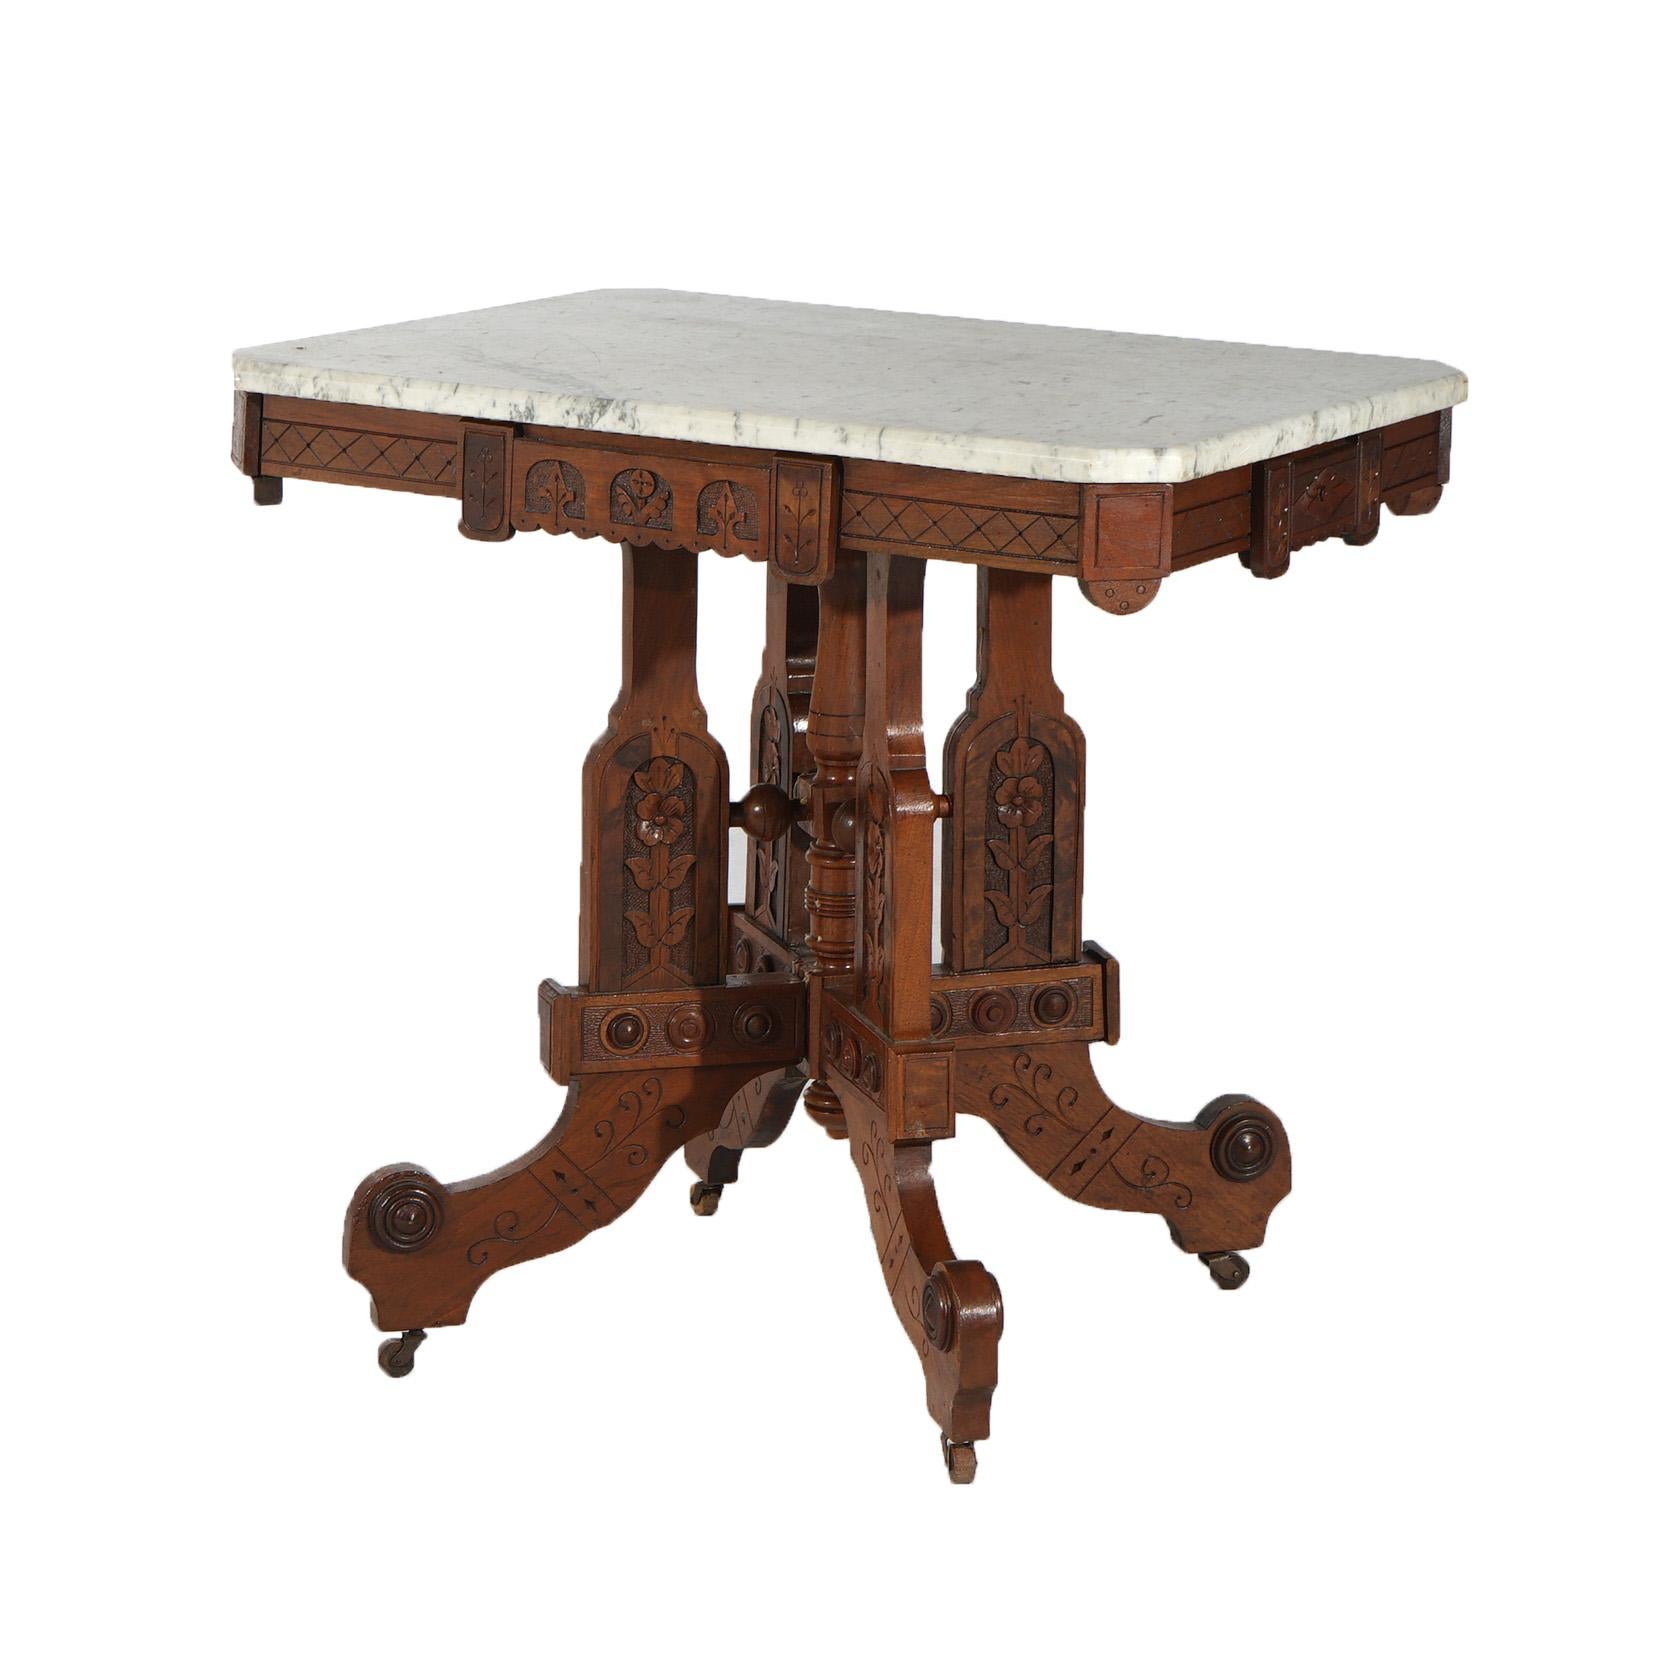 An antique Eastlake Aesthetic parlor table offers clipped corner marble top over walnut base having carved foliate and floral elements throughout and raised on stylized scroll form legs, c1880

Measures - 30.5